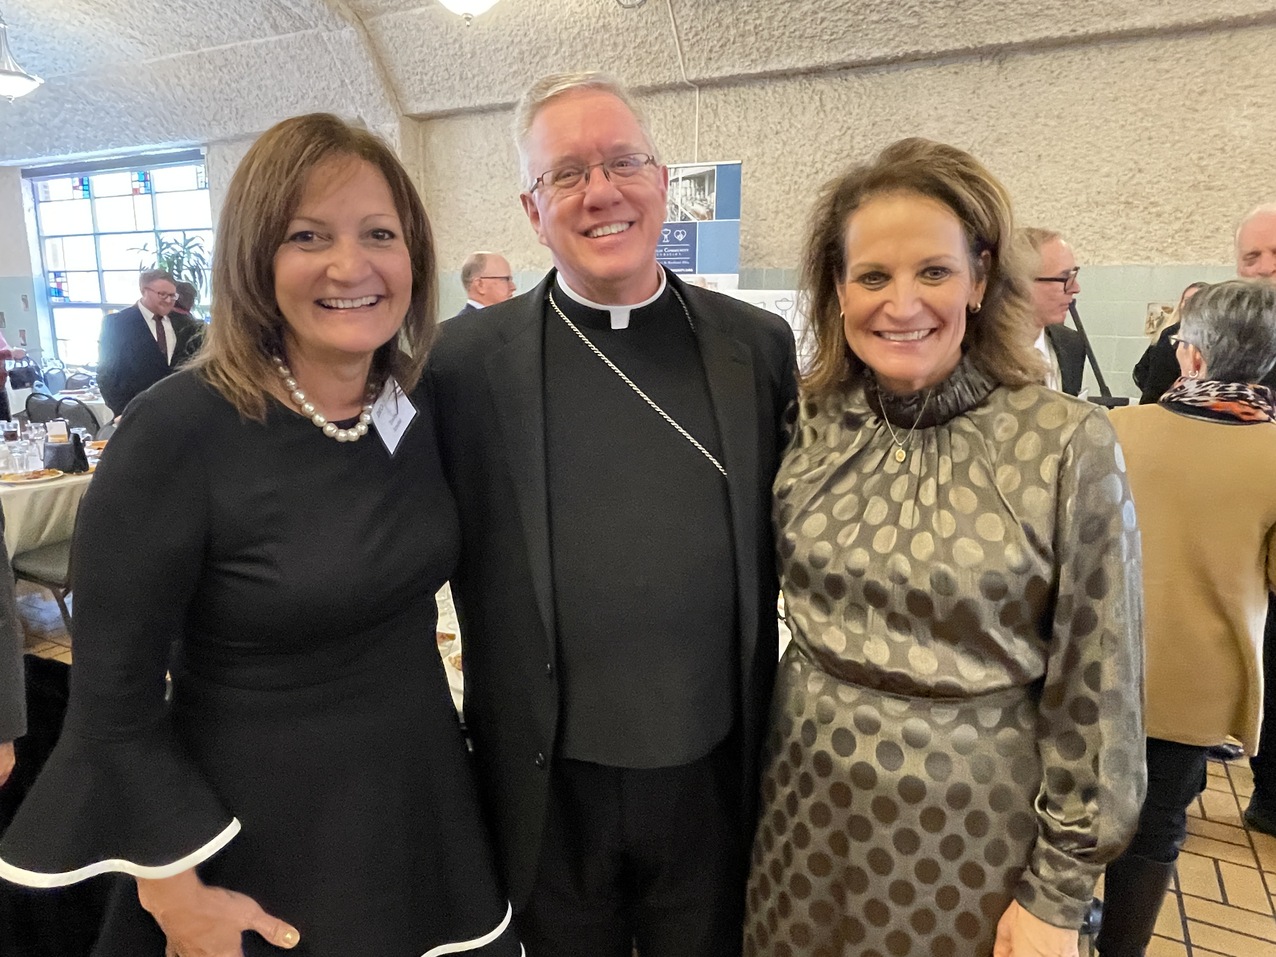 Joan and Lou Perry receive Archbishop Hoban Award for distinguished service to diocese